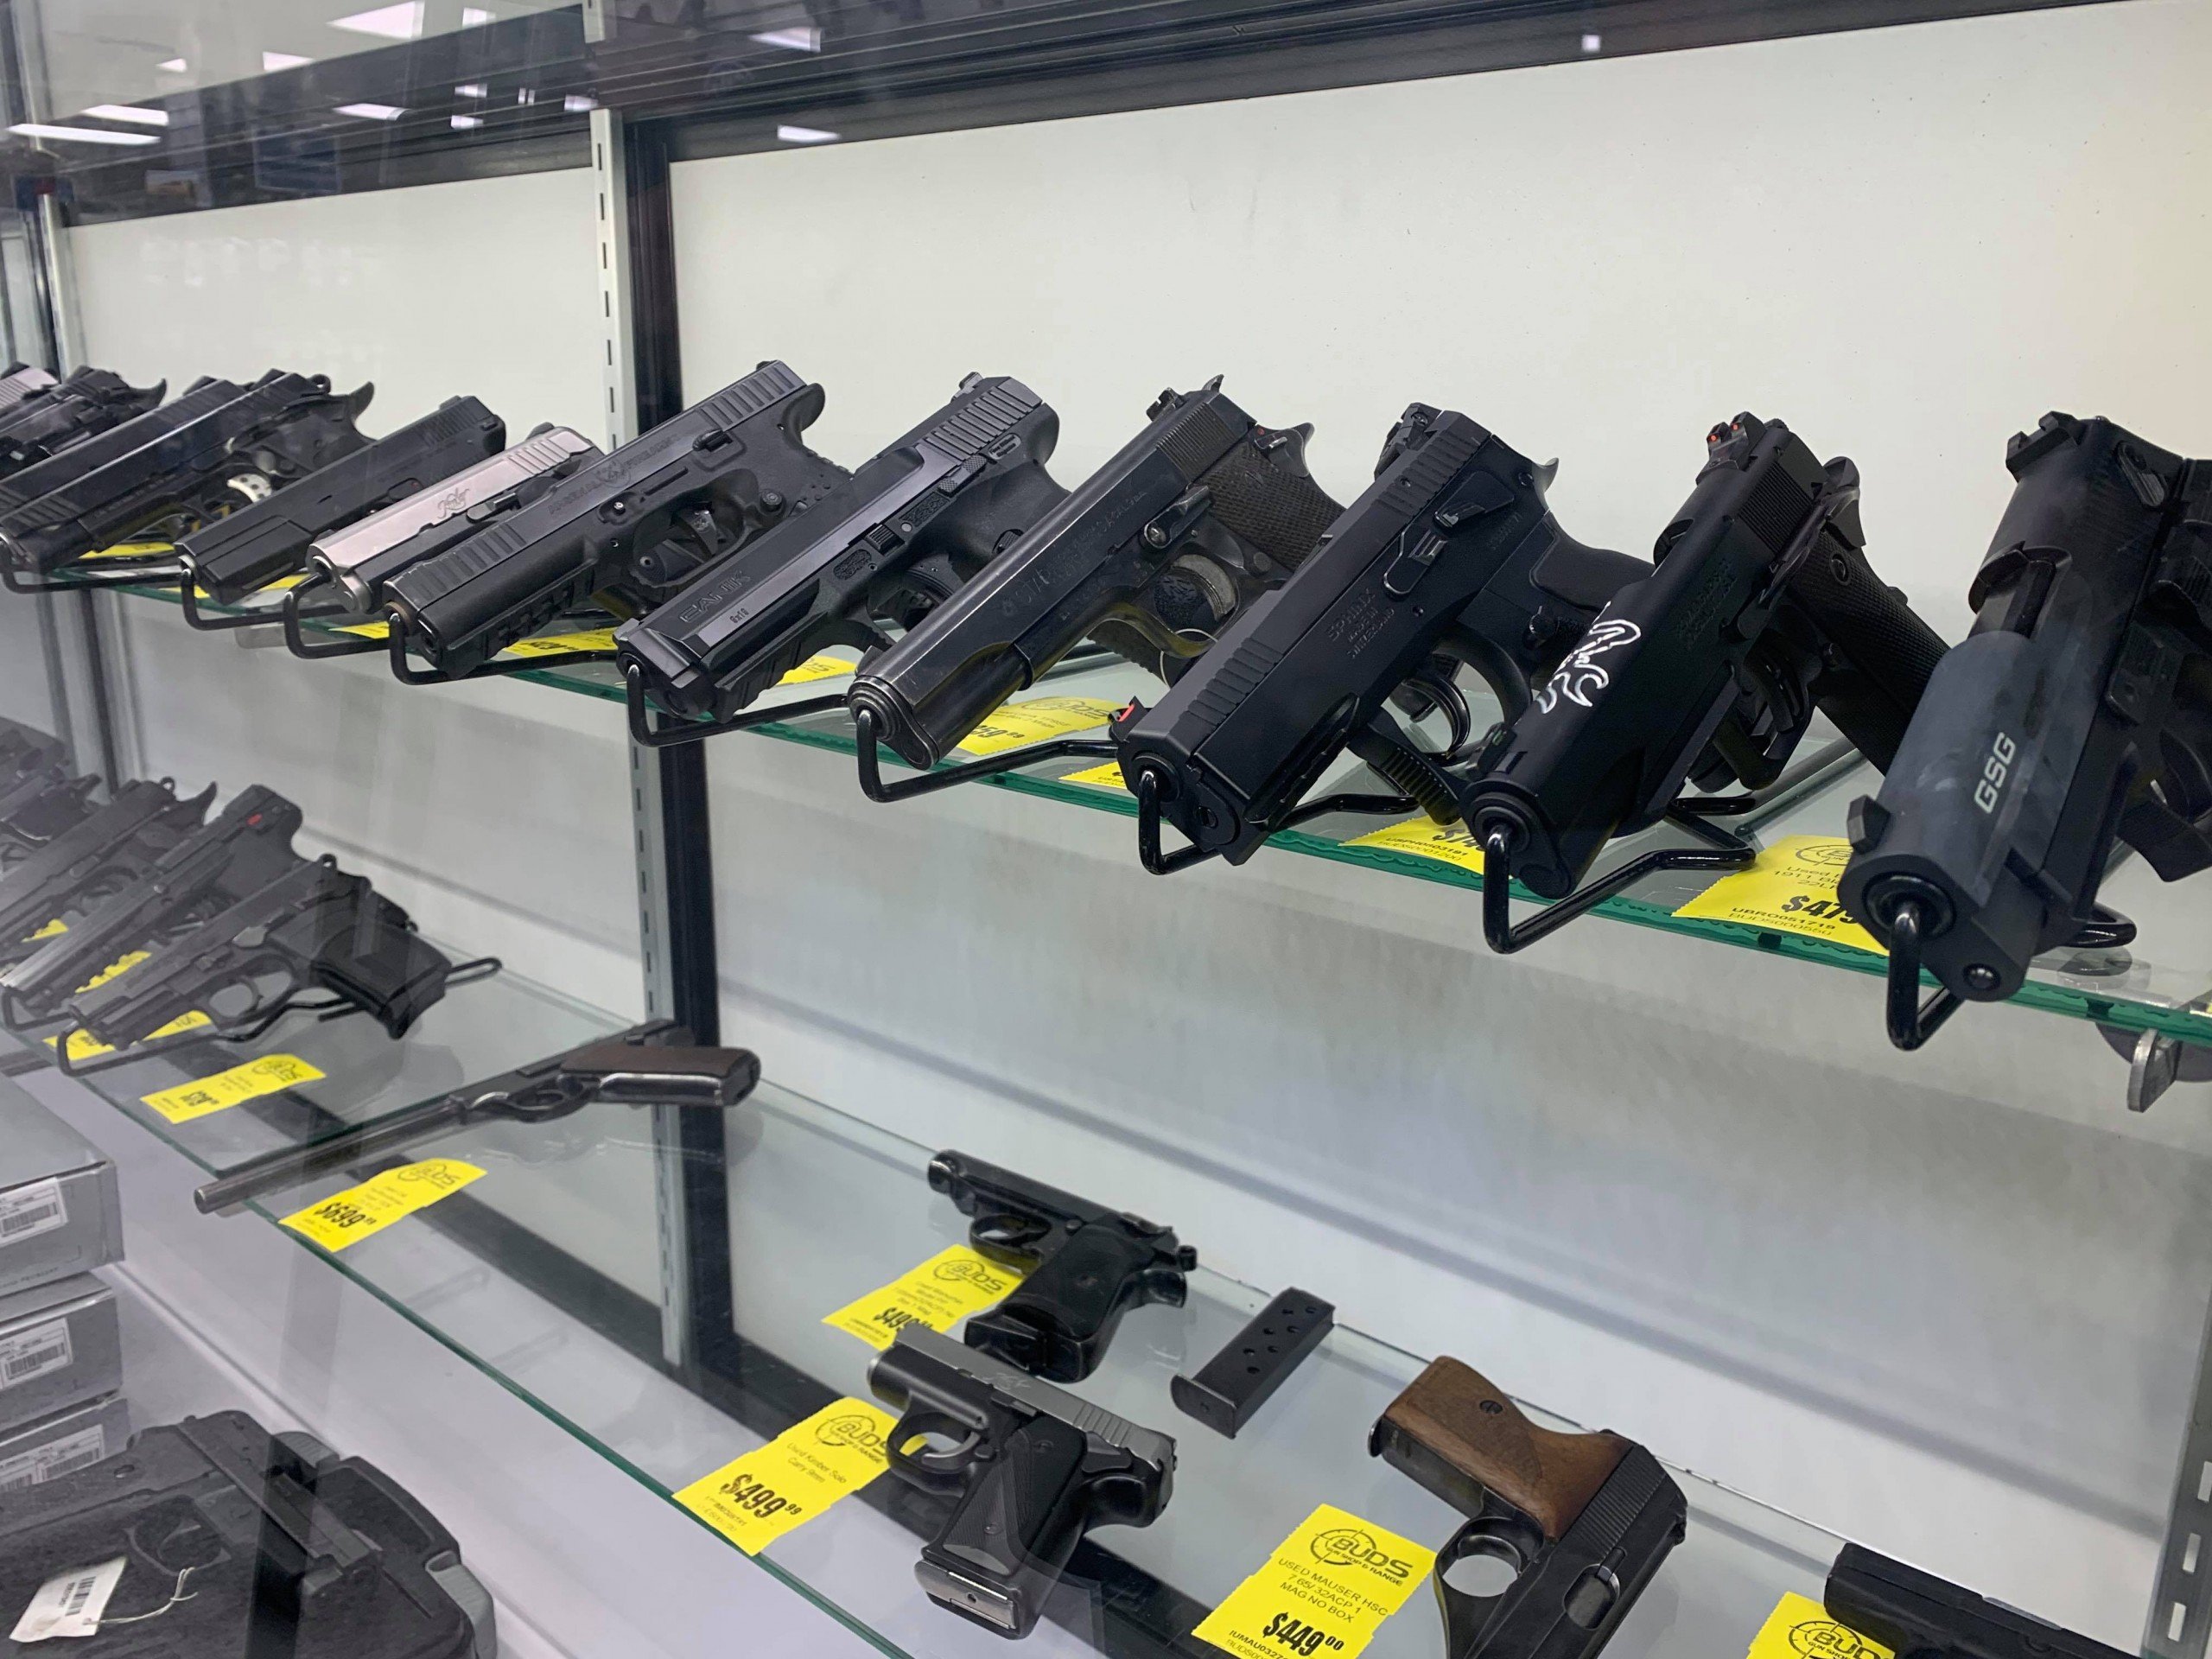 gun-store-to-hold-free-seminars-on-permitless-concealed-carry-law-abc